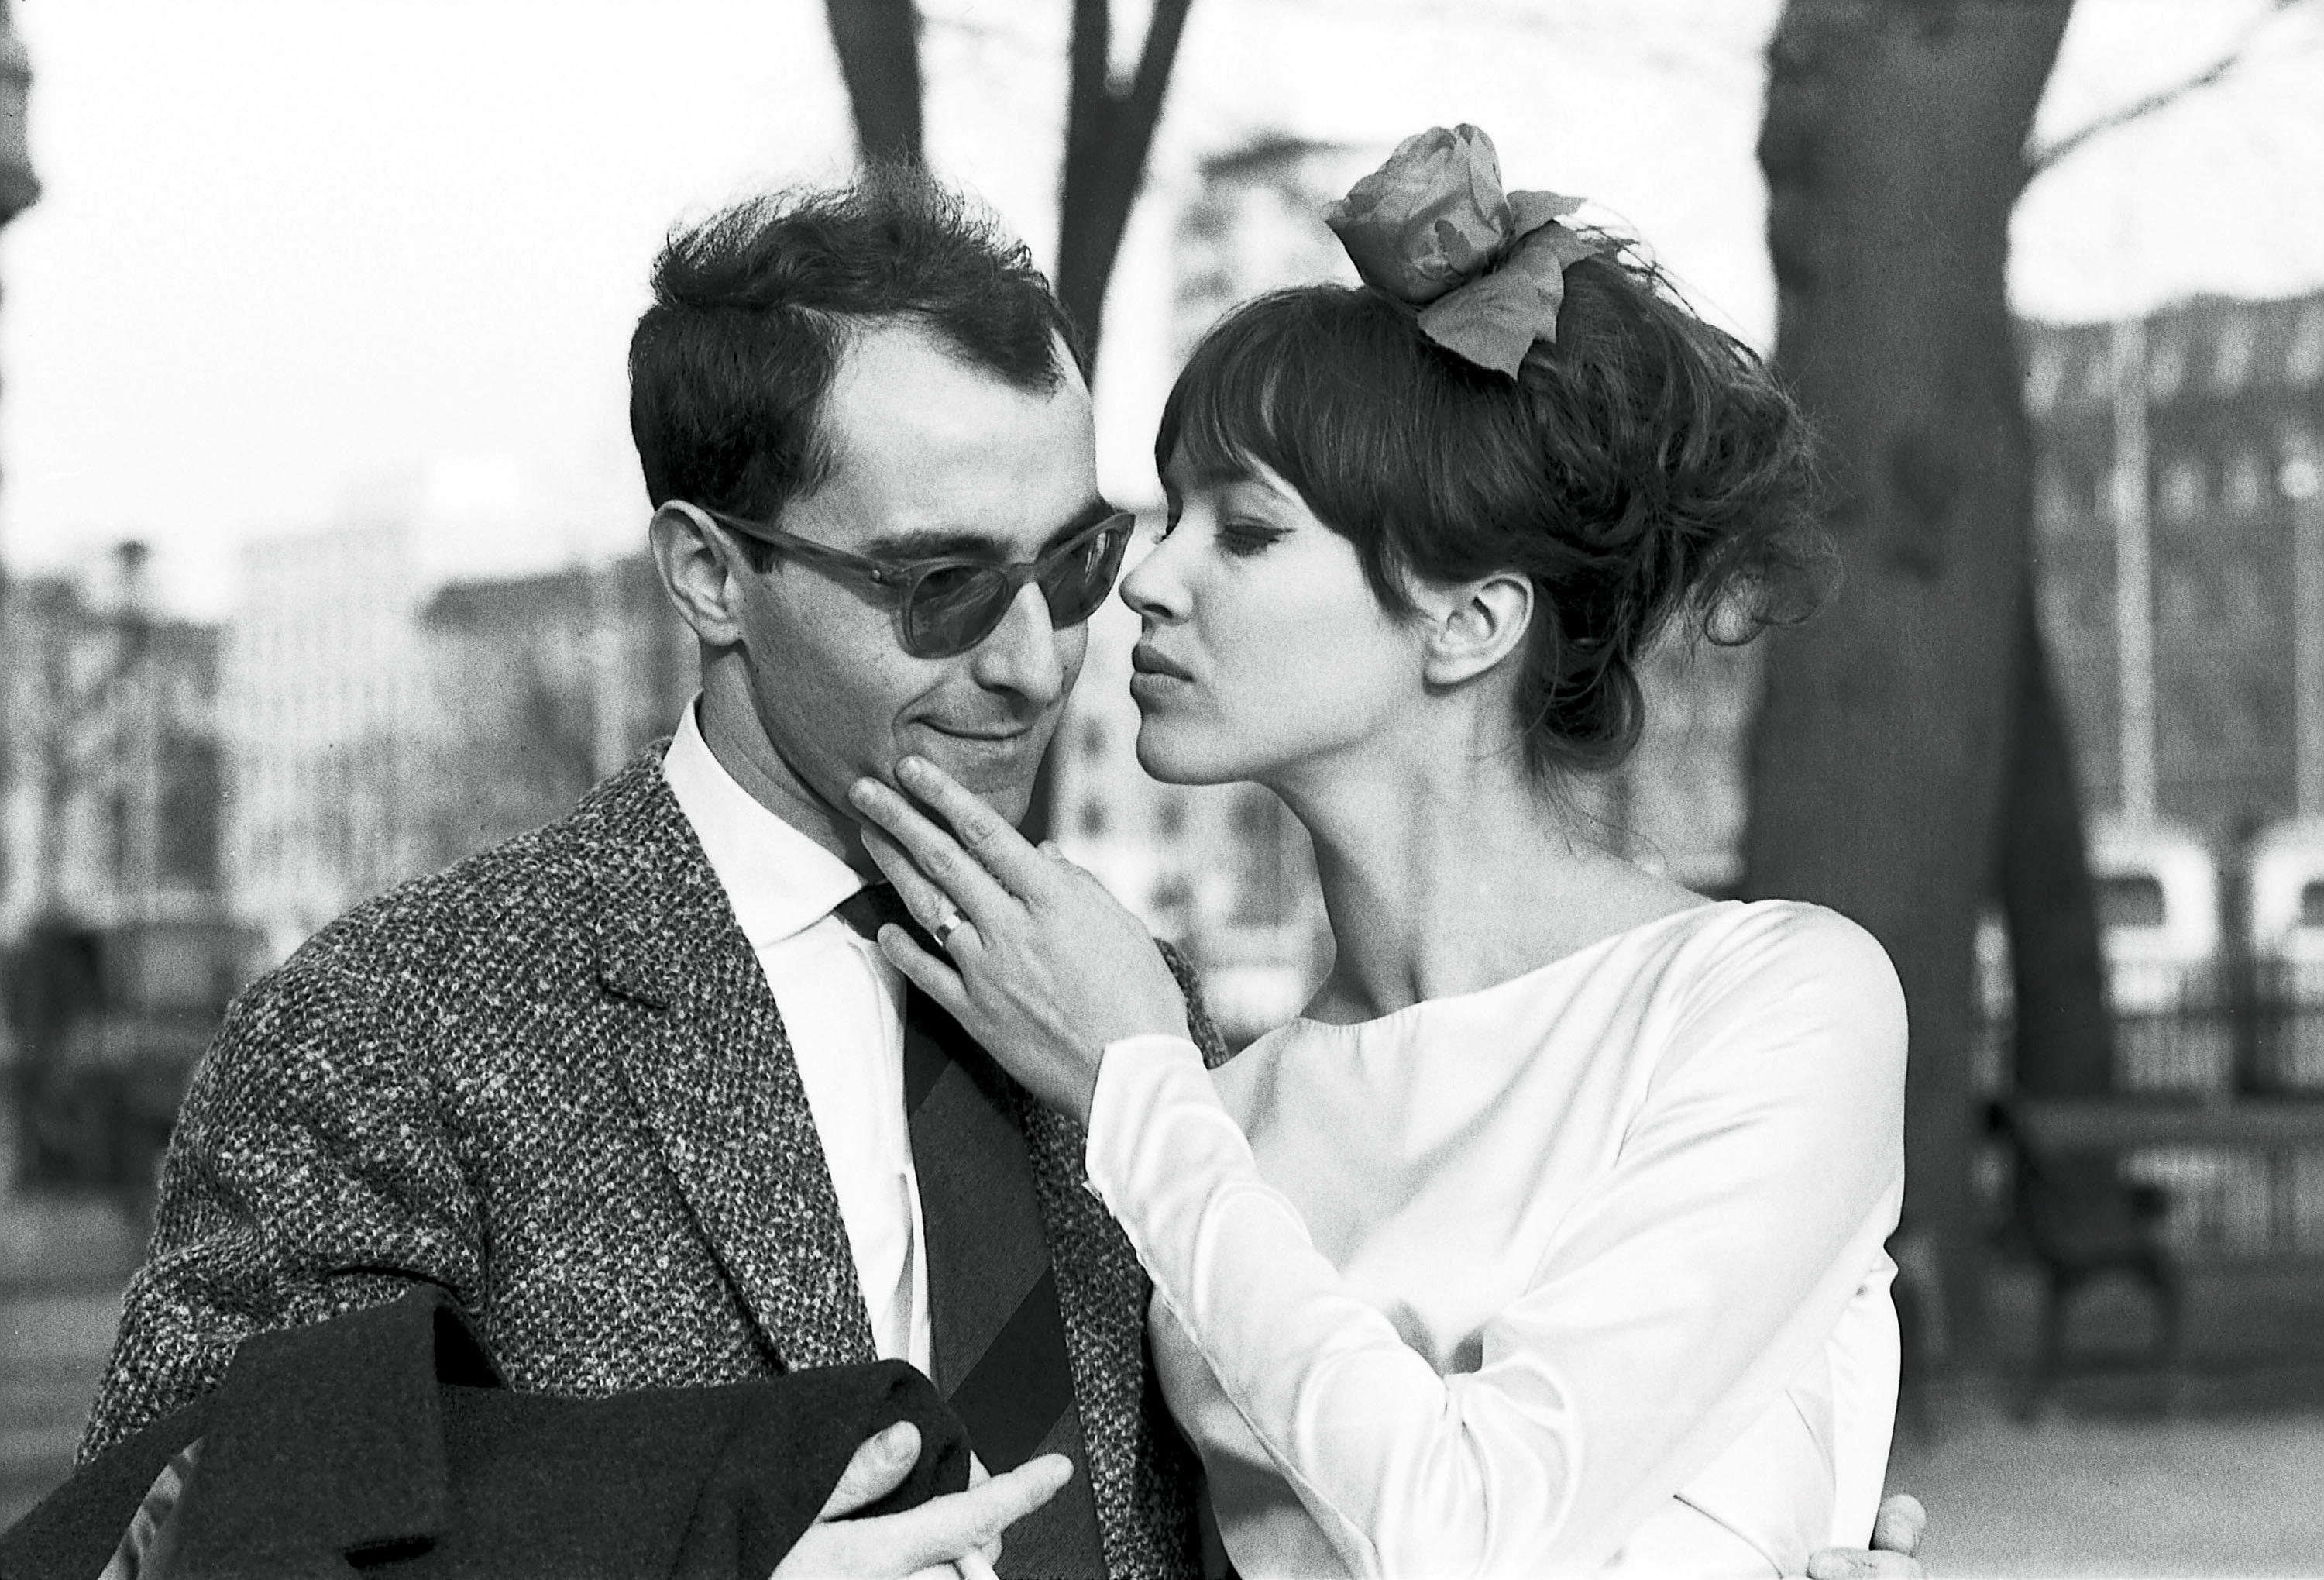 anna karina embracing jean-luc godard in the streets of paris at their wedding